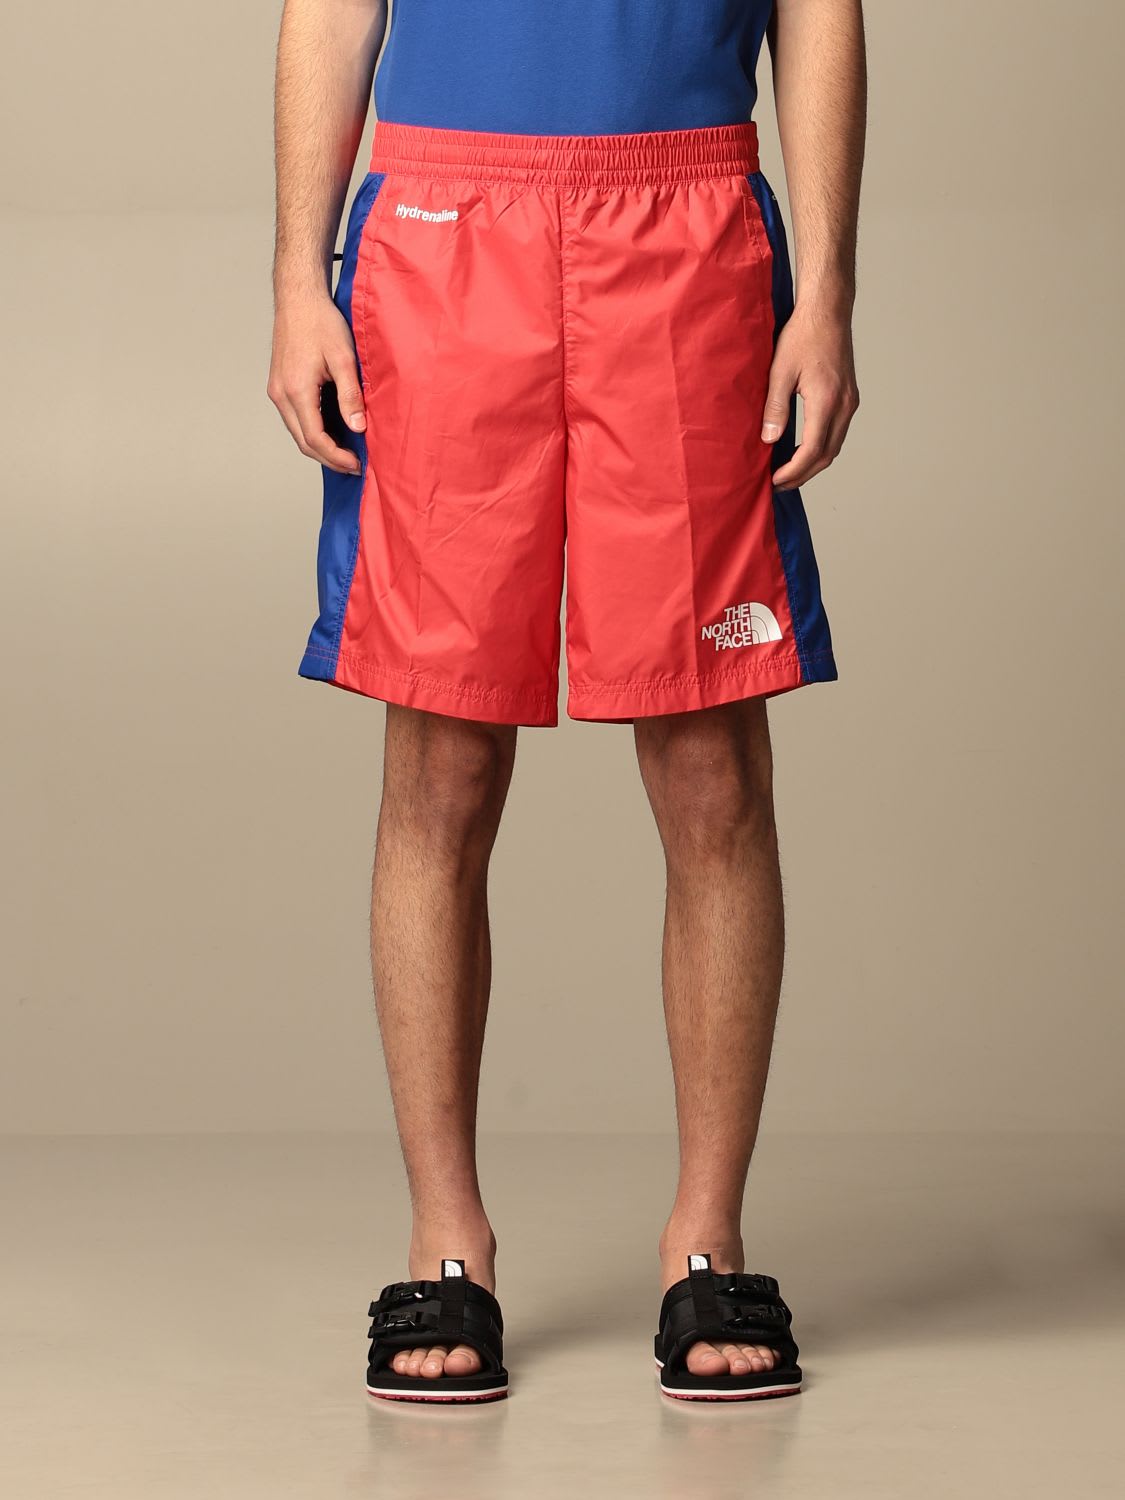 The North Face Swimsuit The North Face Core Boxer Swimsuit